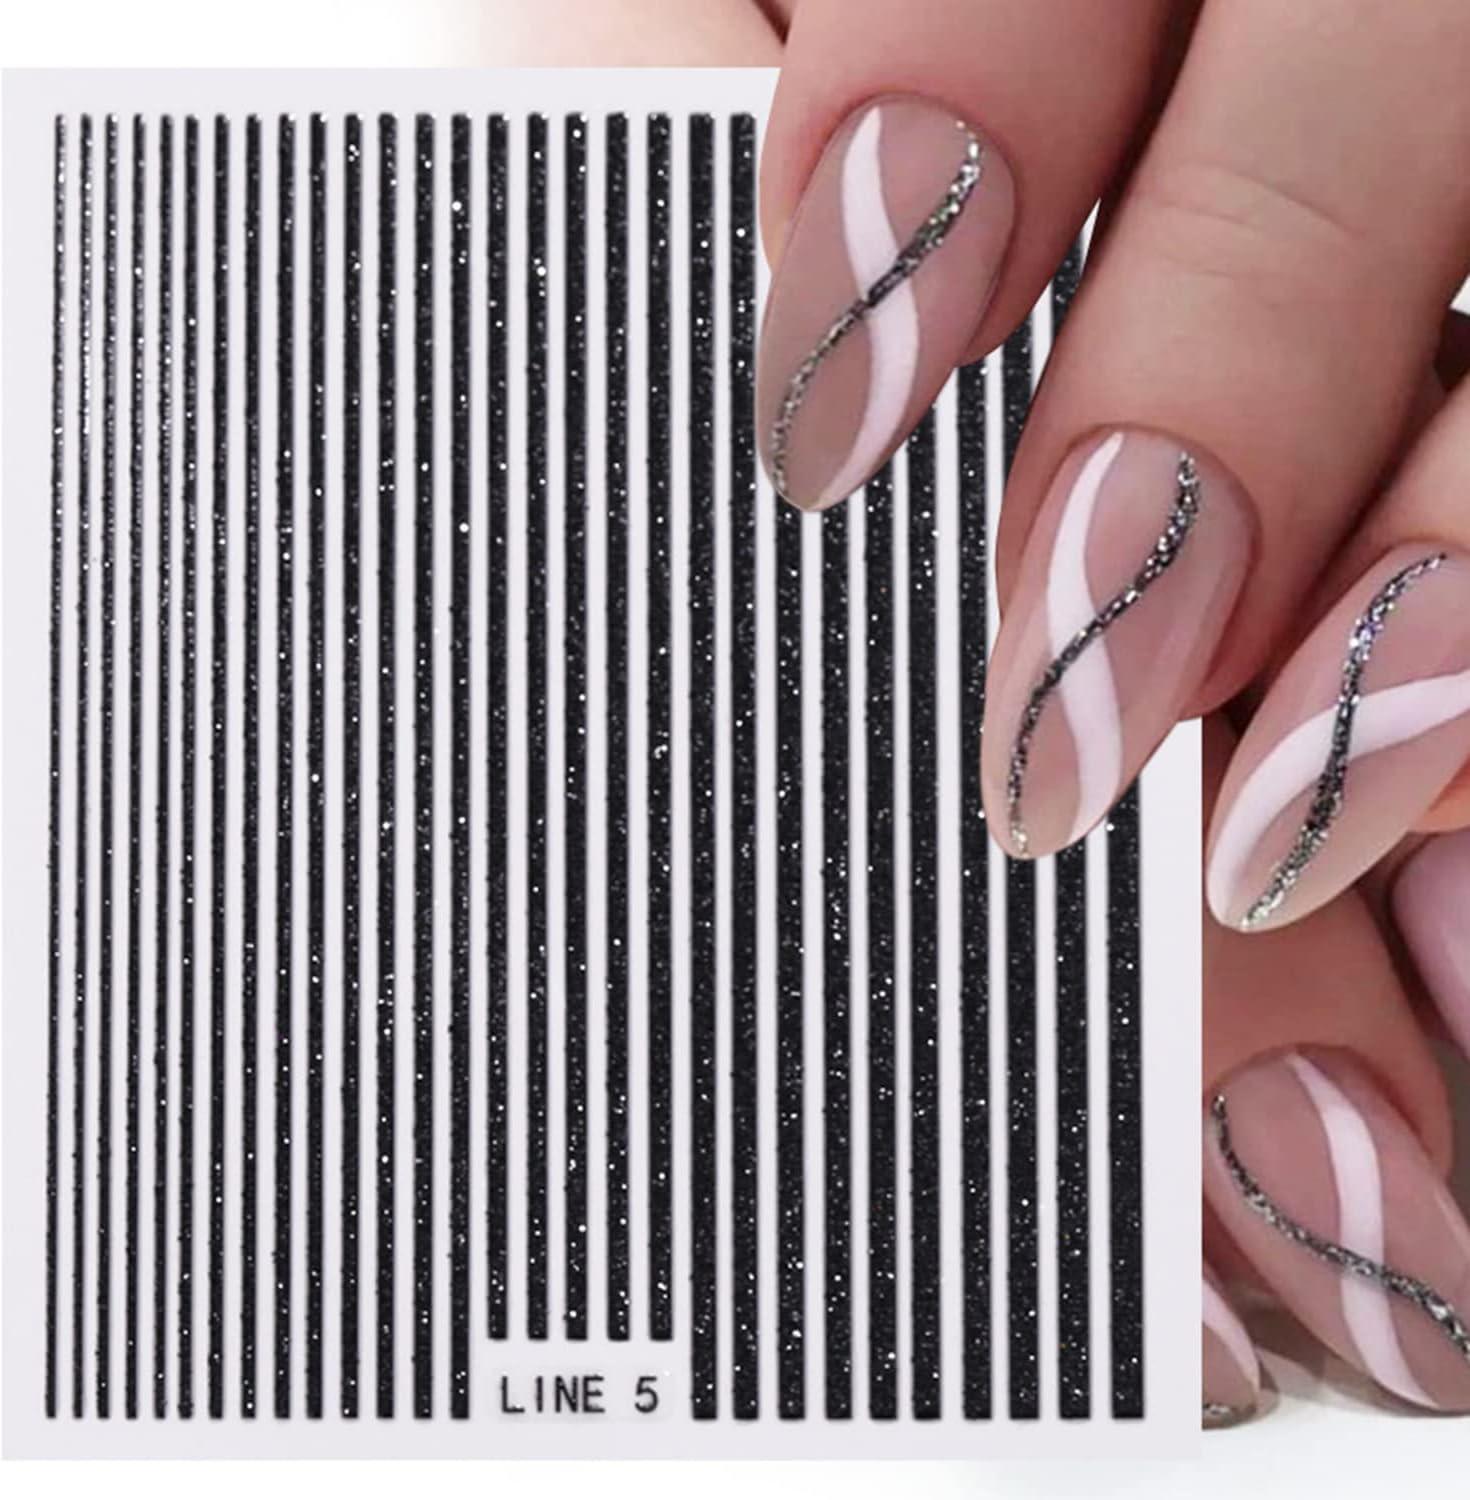 2pcs Geometry Line Nail Art Stickers Decals, Black White French Design 3D  Adhesive Decals For Acrylic Nails Art Decoration DIY Manicure Supplies Nail  Accessories Friend Gift | SHEIN EUQS